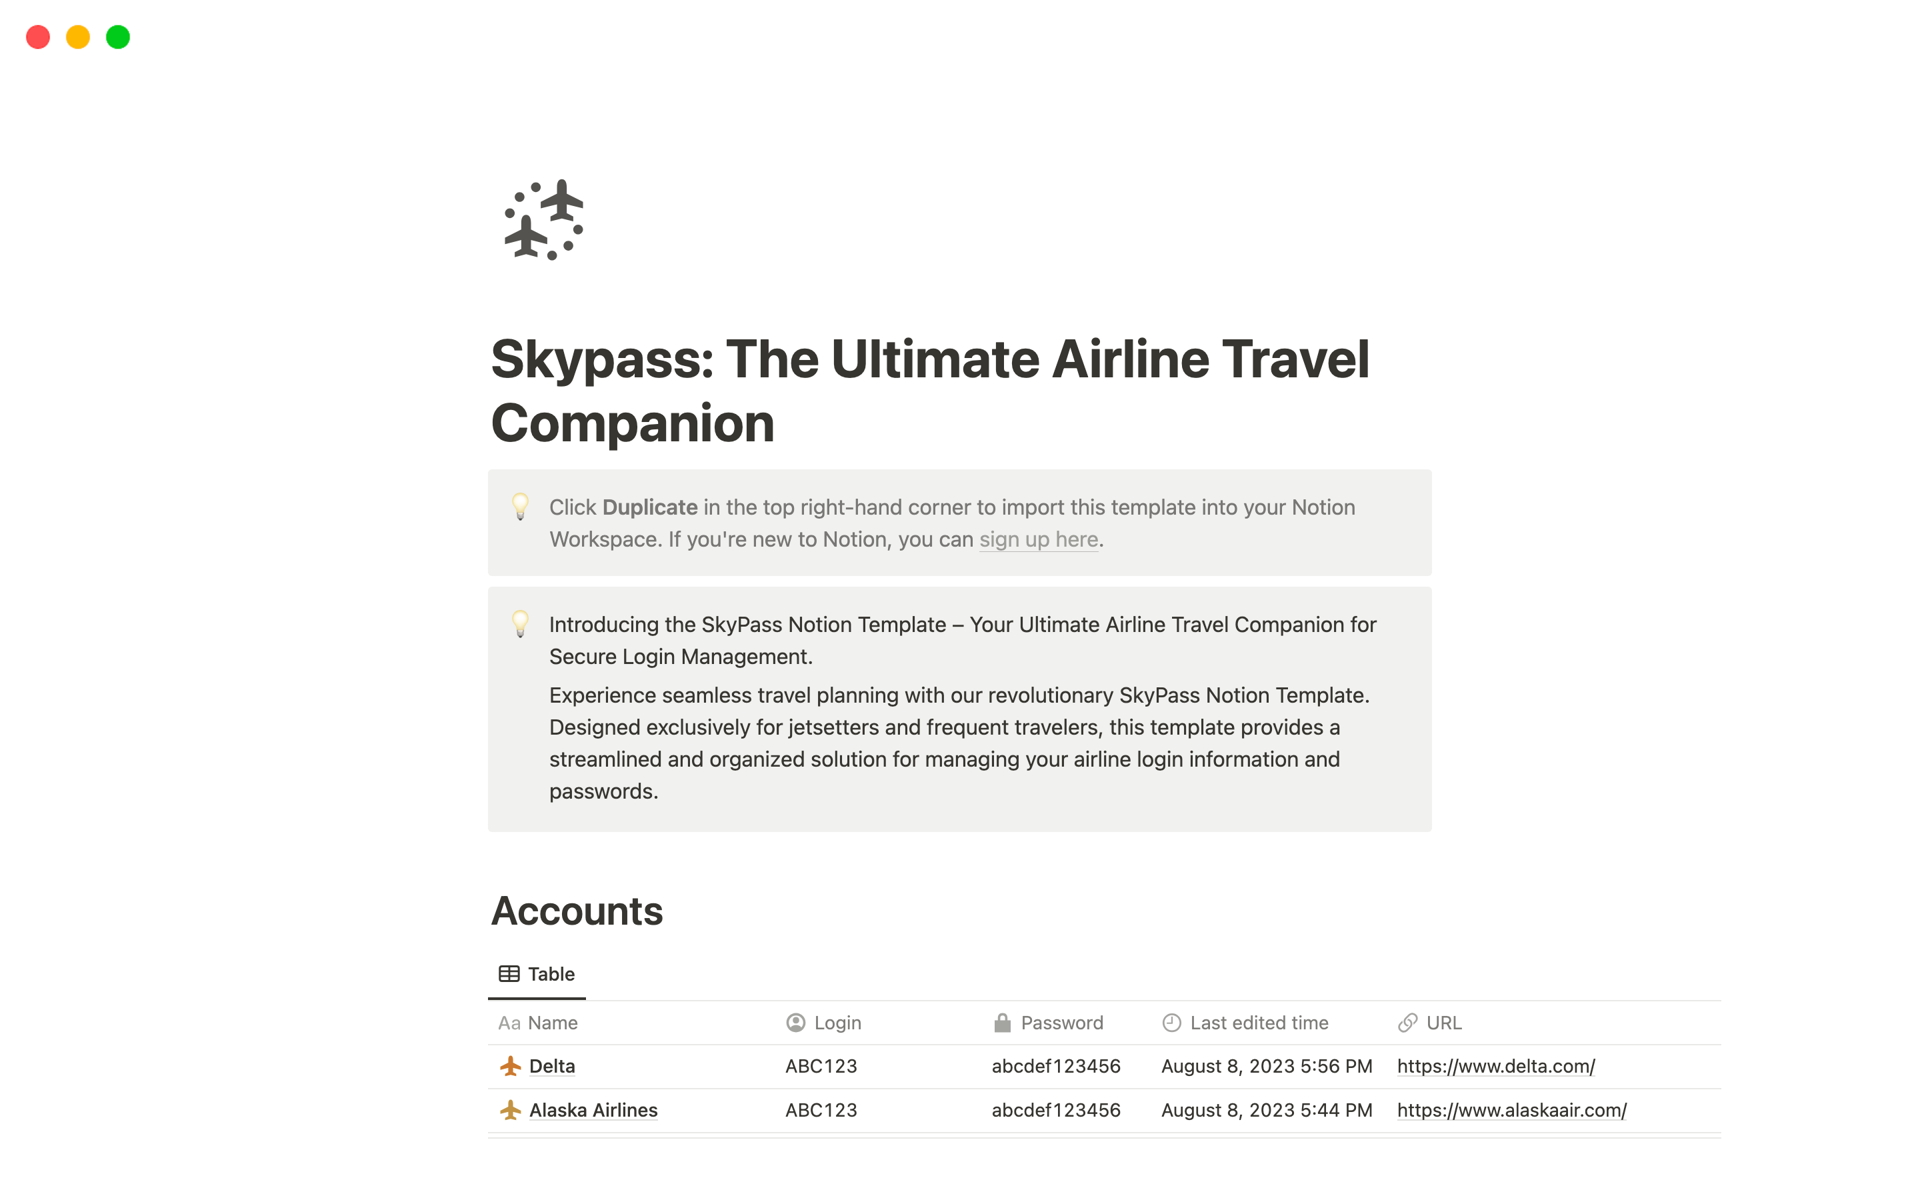 Experience seamless travel planning with our revolutionary SkyPass Notion Template. Designed exclusively for jetsetters and frequent travelers, this template provides a streamlined and organized solution for managing your airline login information and passwords.